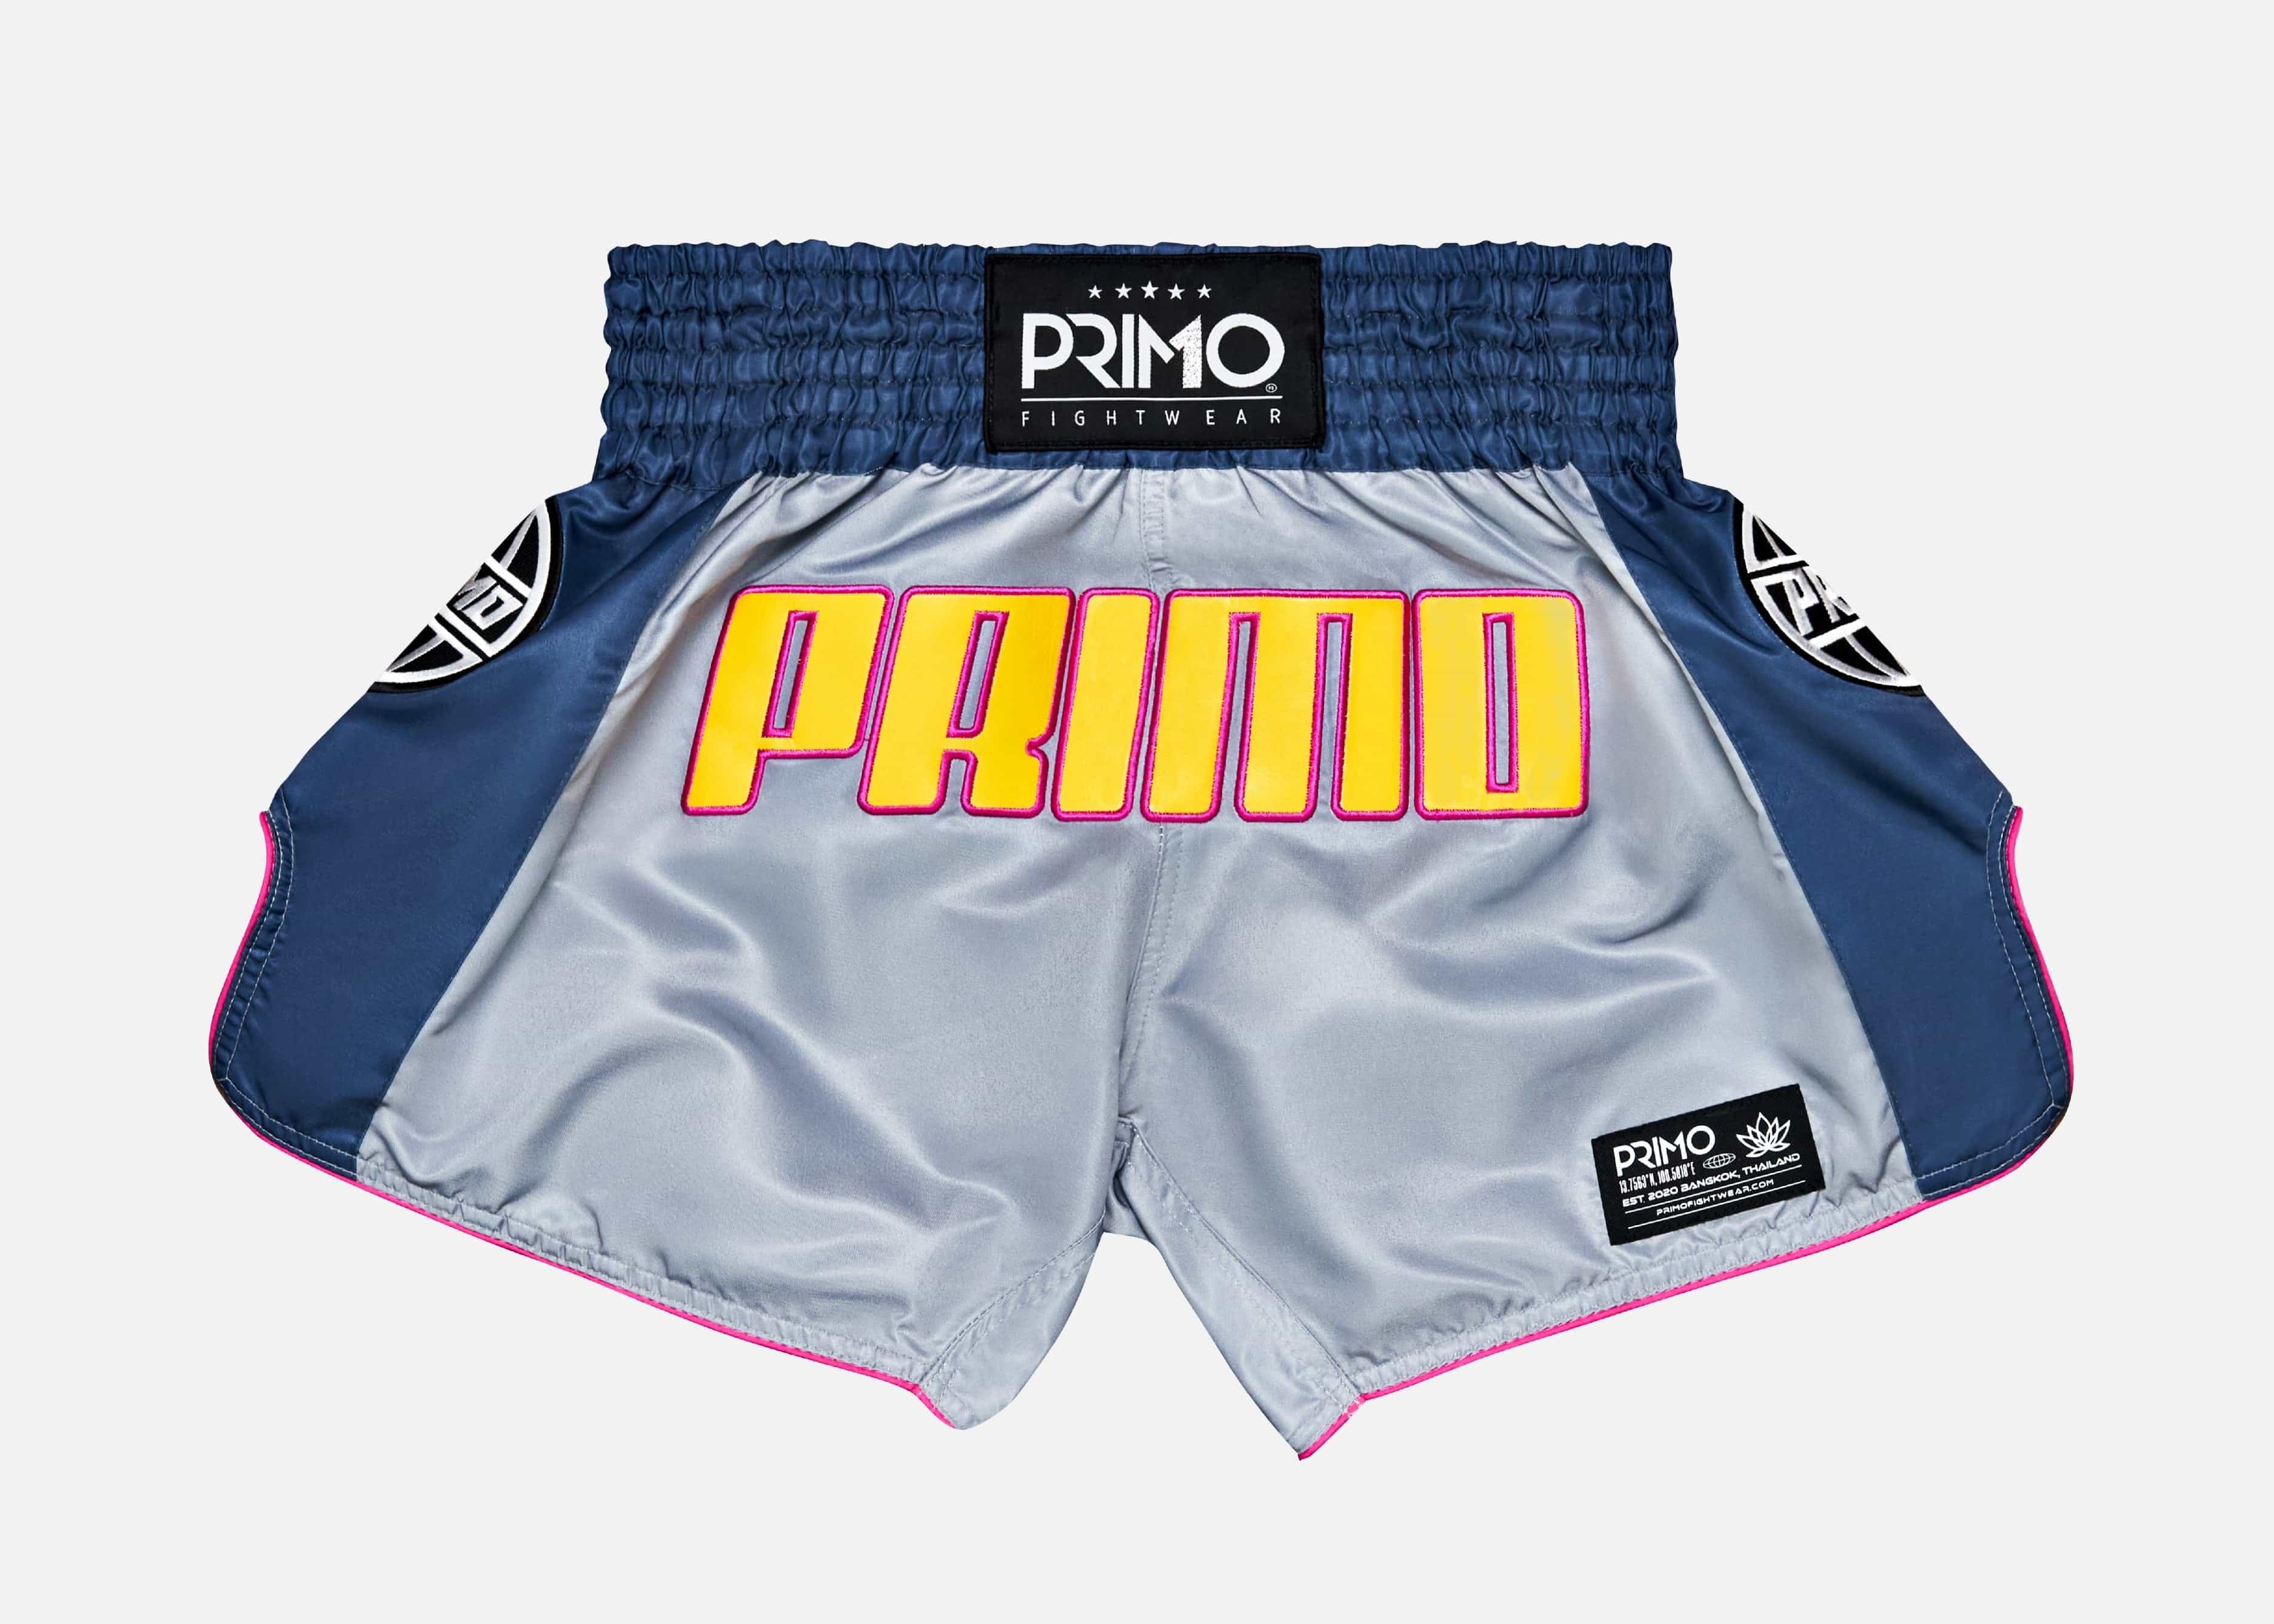 Primo Fight Wear Official Muay Thai Shorts - Trinity Series - Grey